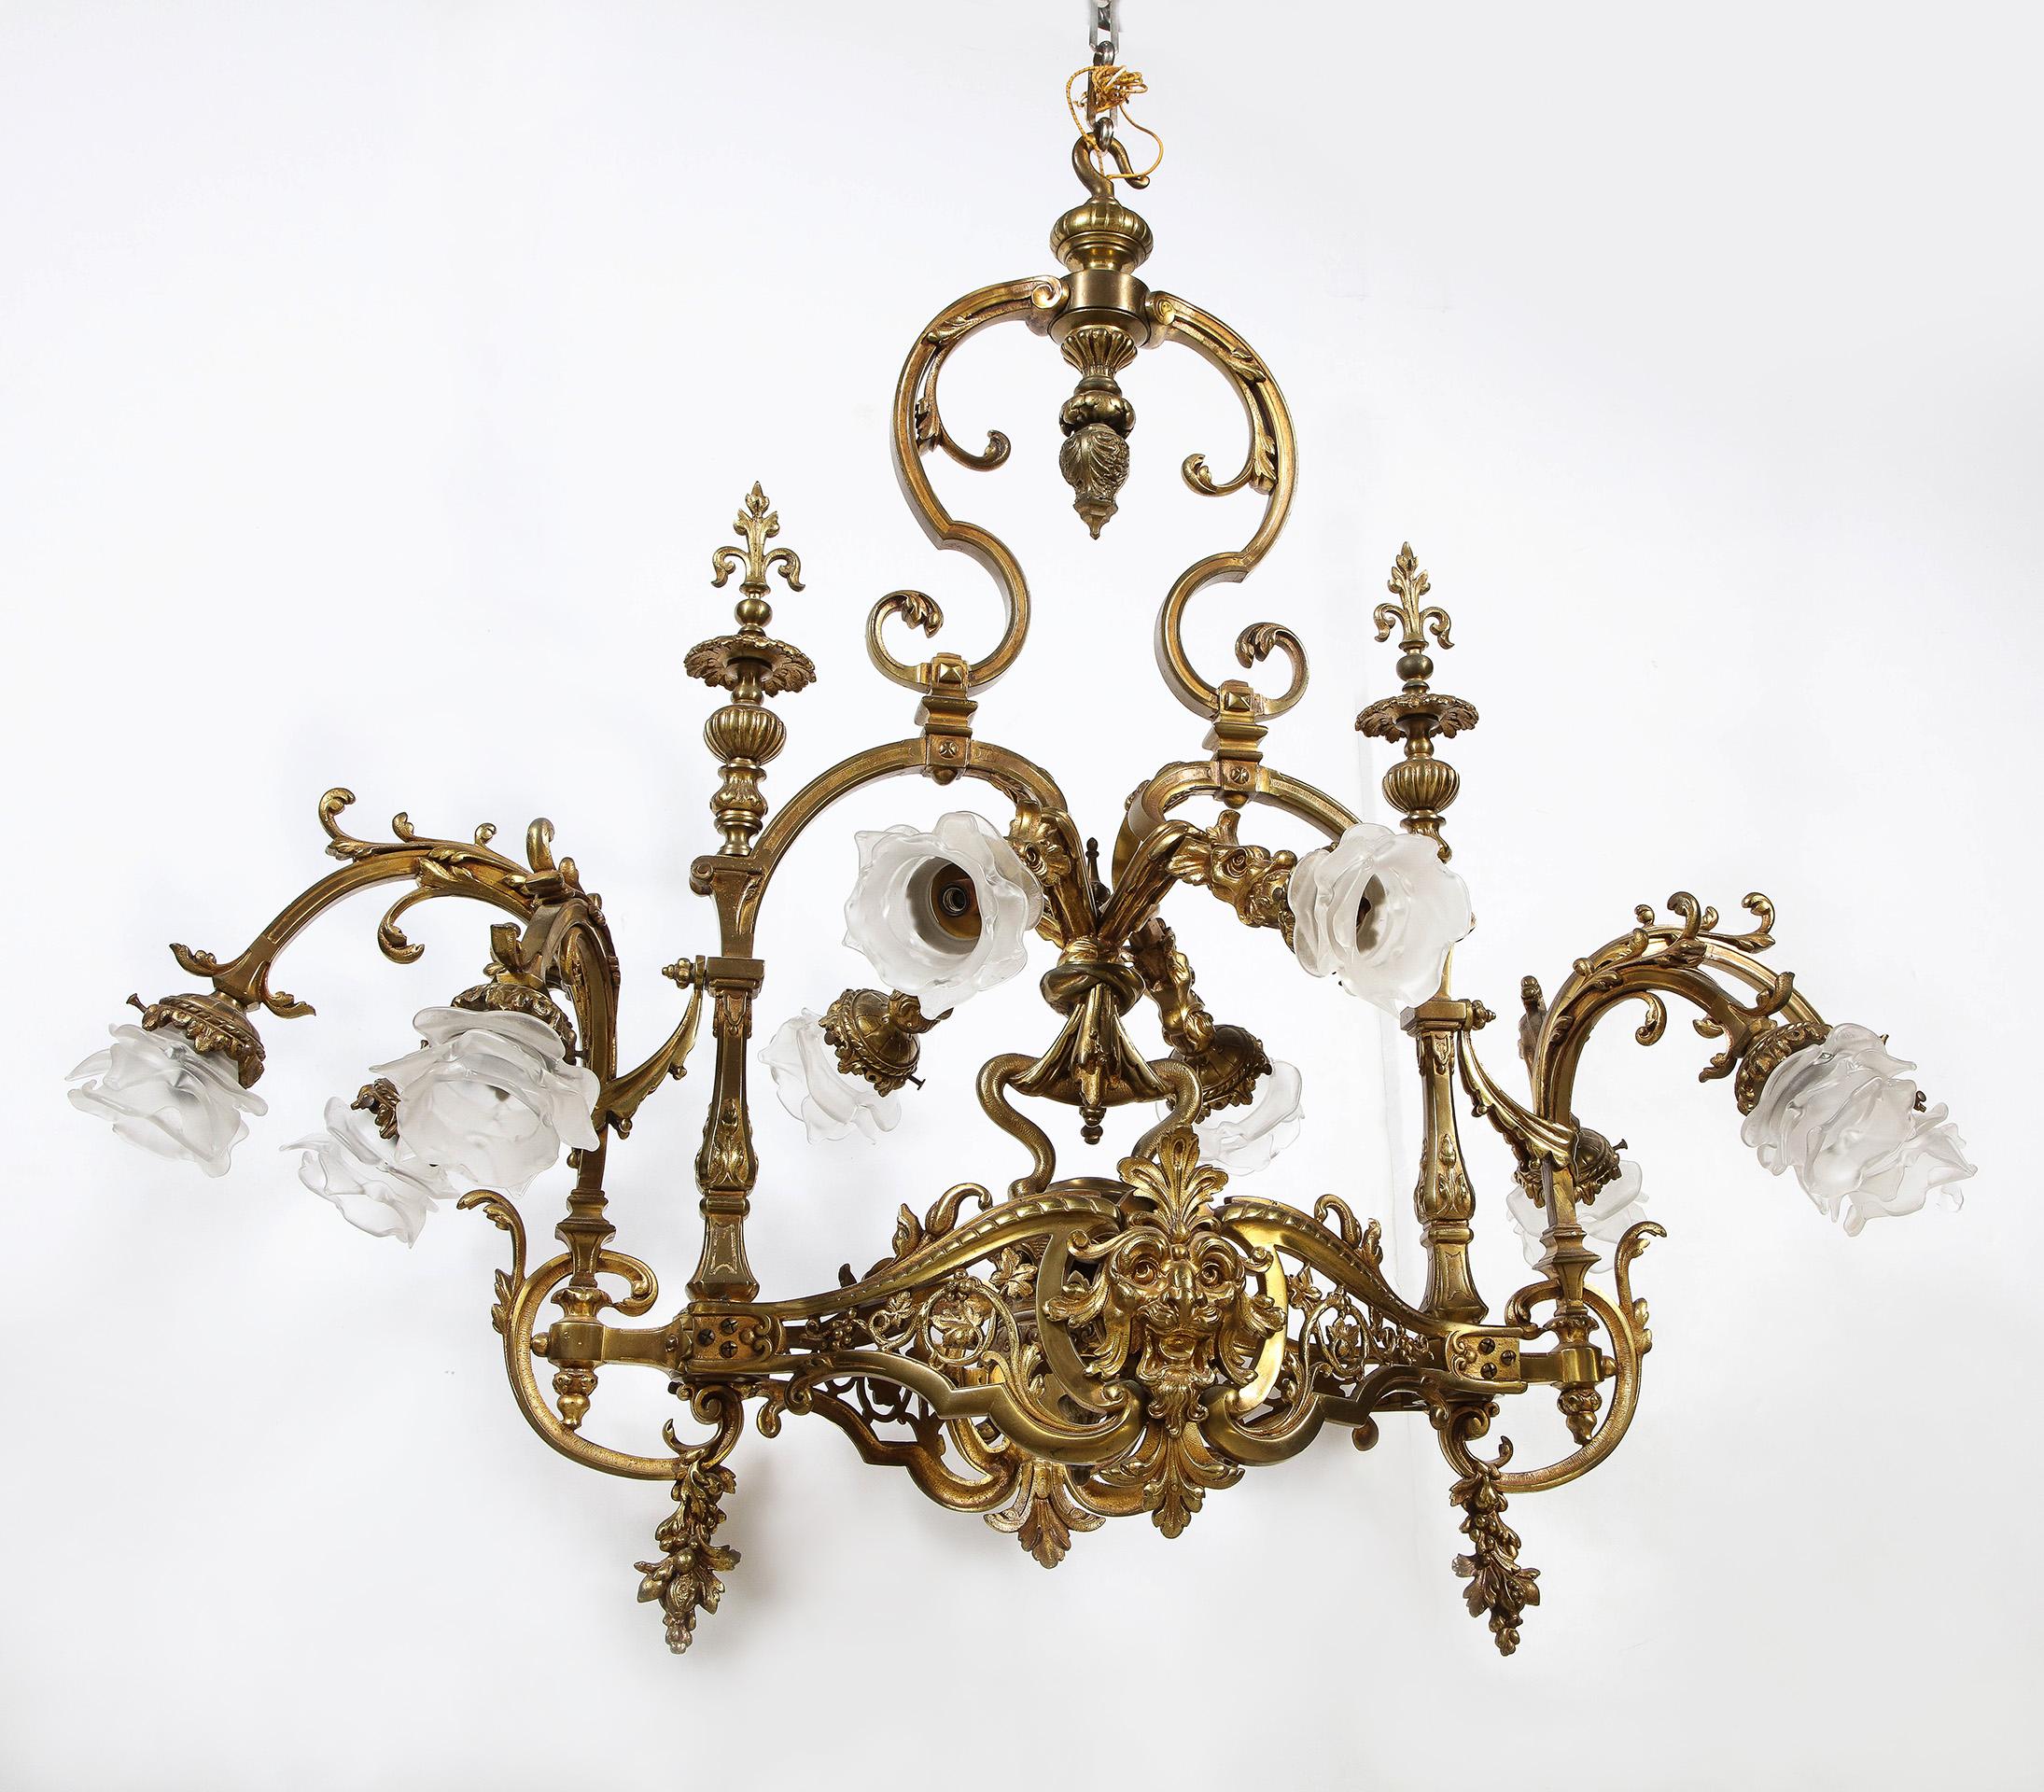 A very fine French Belle Epoque 19th century Louis XIV style ten-light gilt-bronze chandelier. The ovoid shaped body with scrolling arms ending in floral frosted glass shades, the whole over a pierced basket centered by a gothic face.